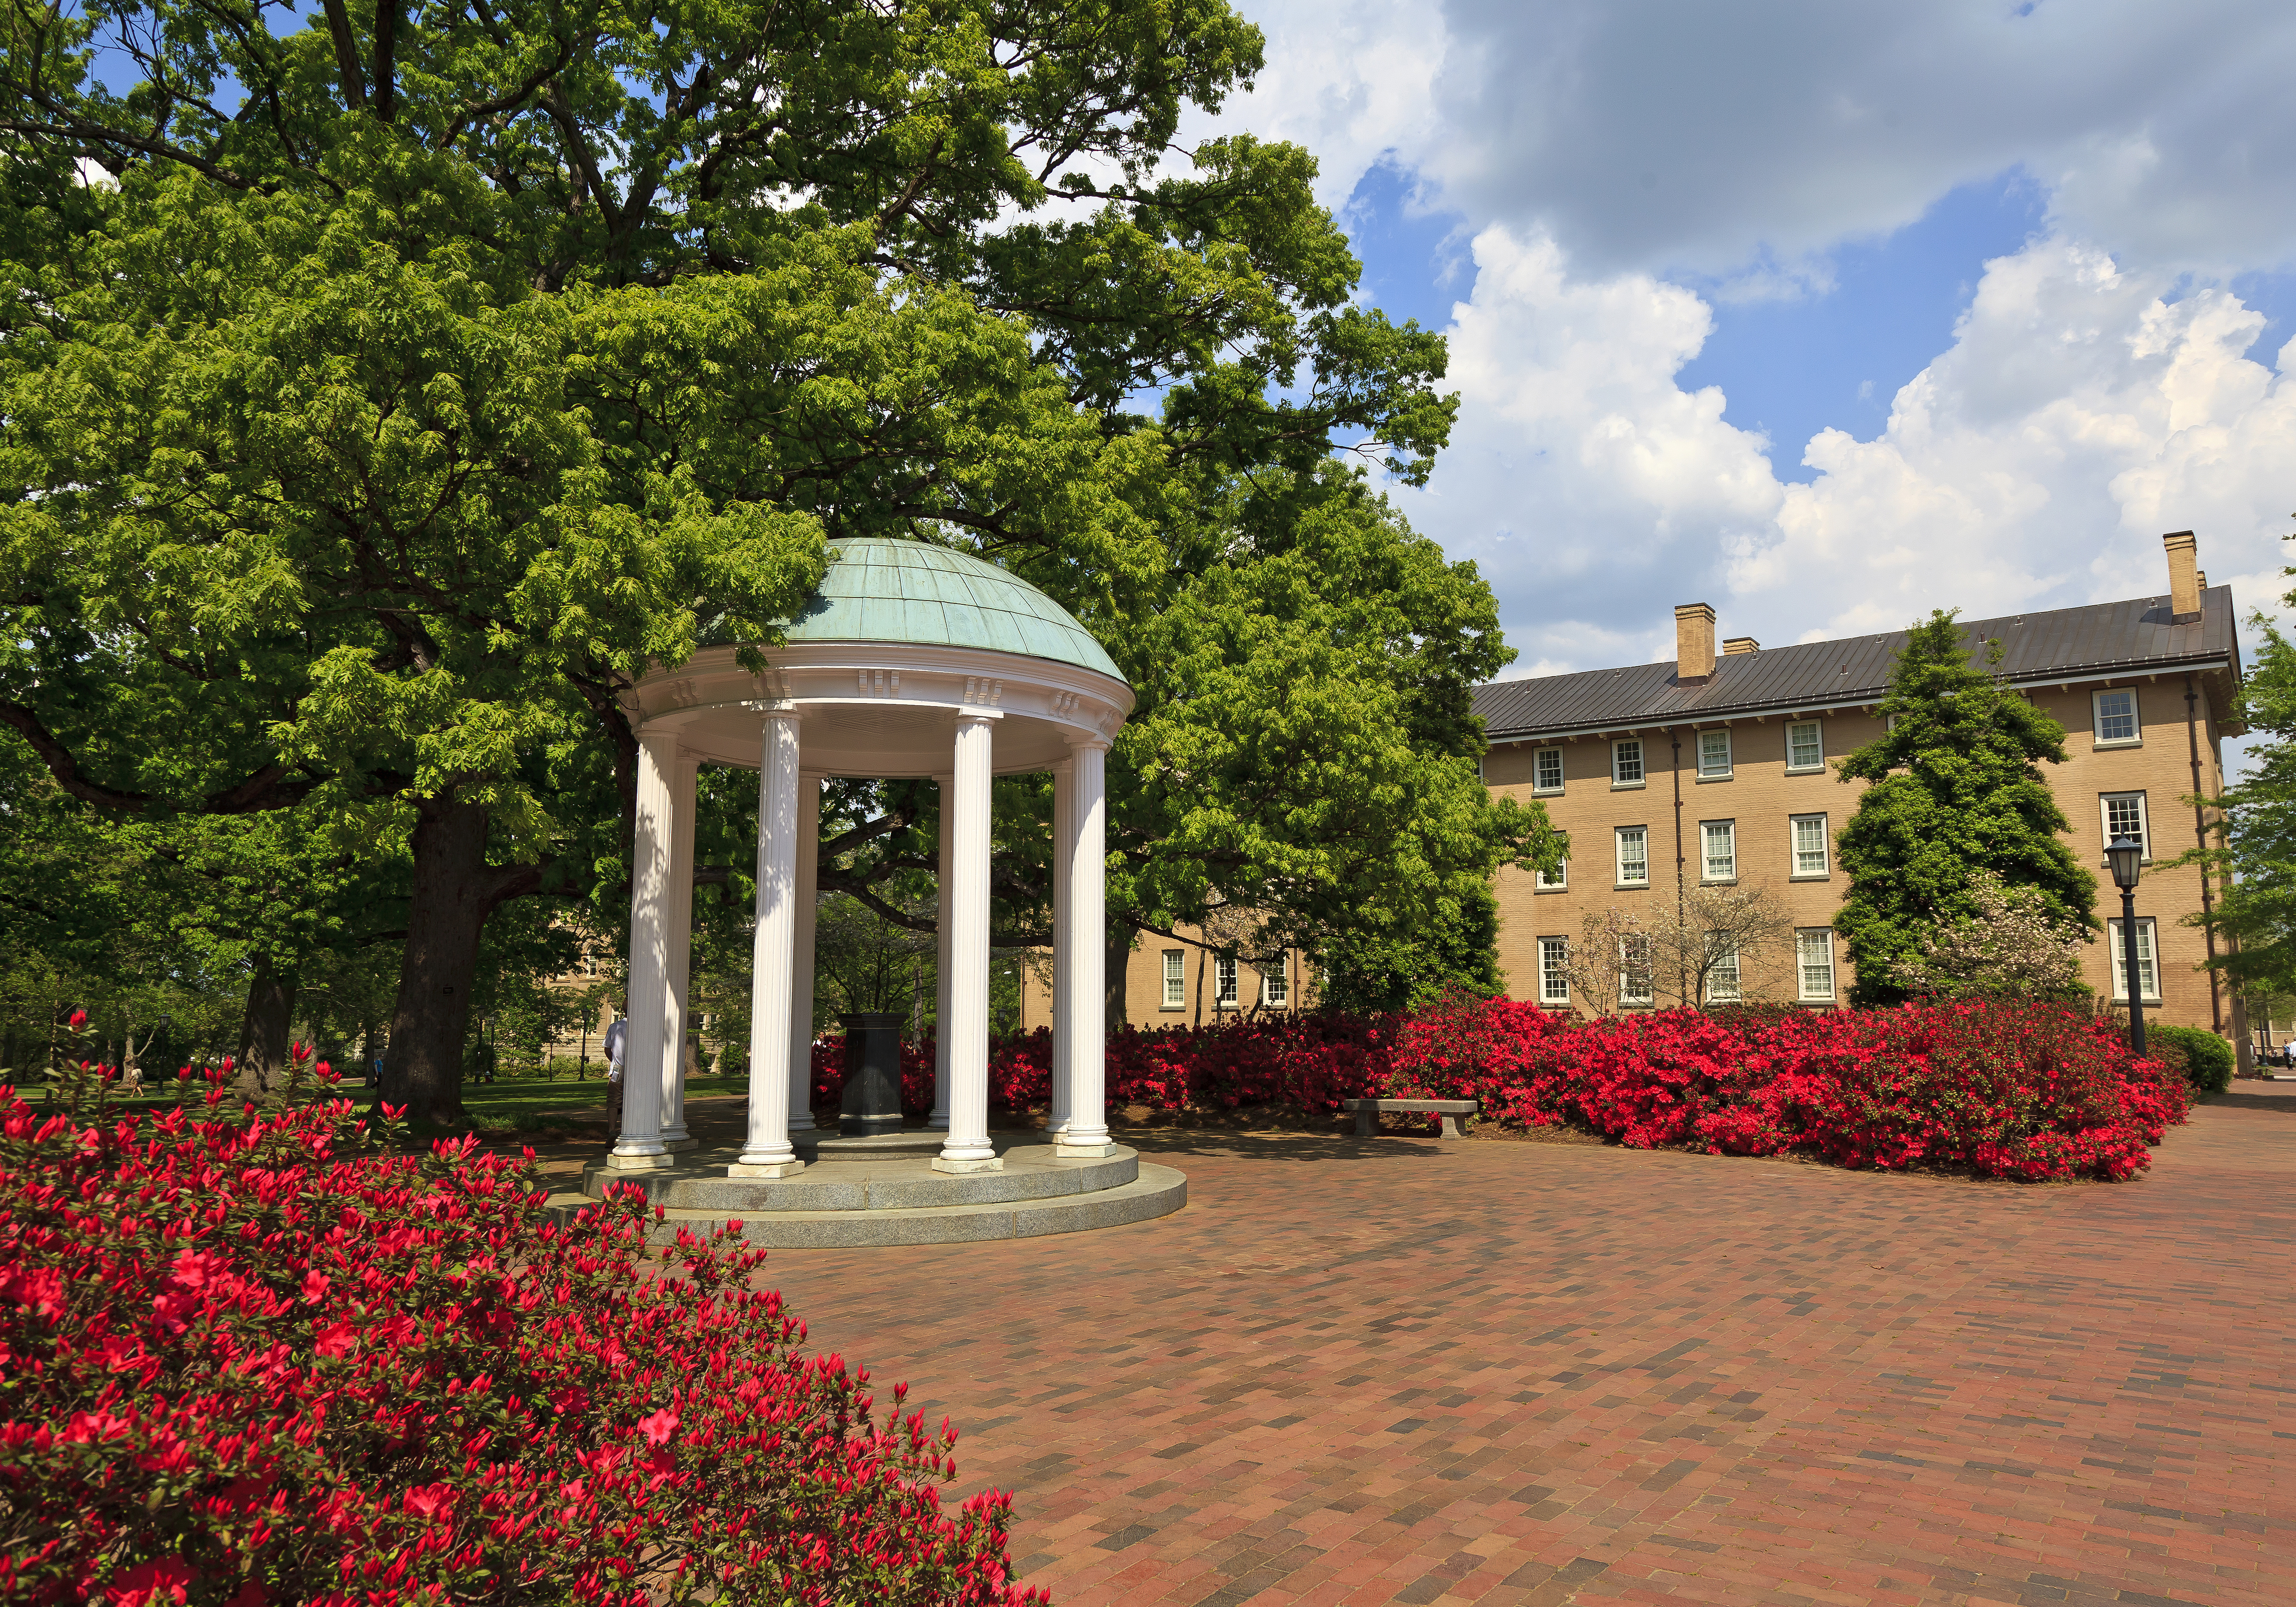 Historic Old Well at UNC Chapel Hill. Photo courtesy of DollarPhotoClub.com